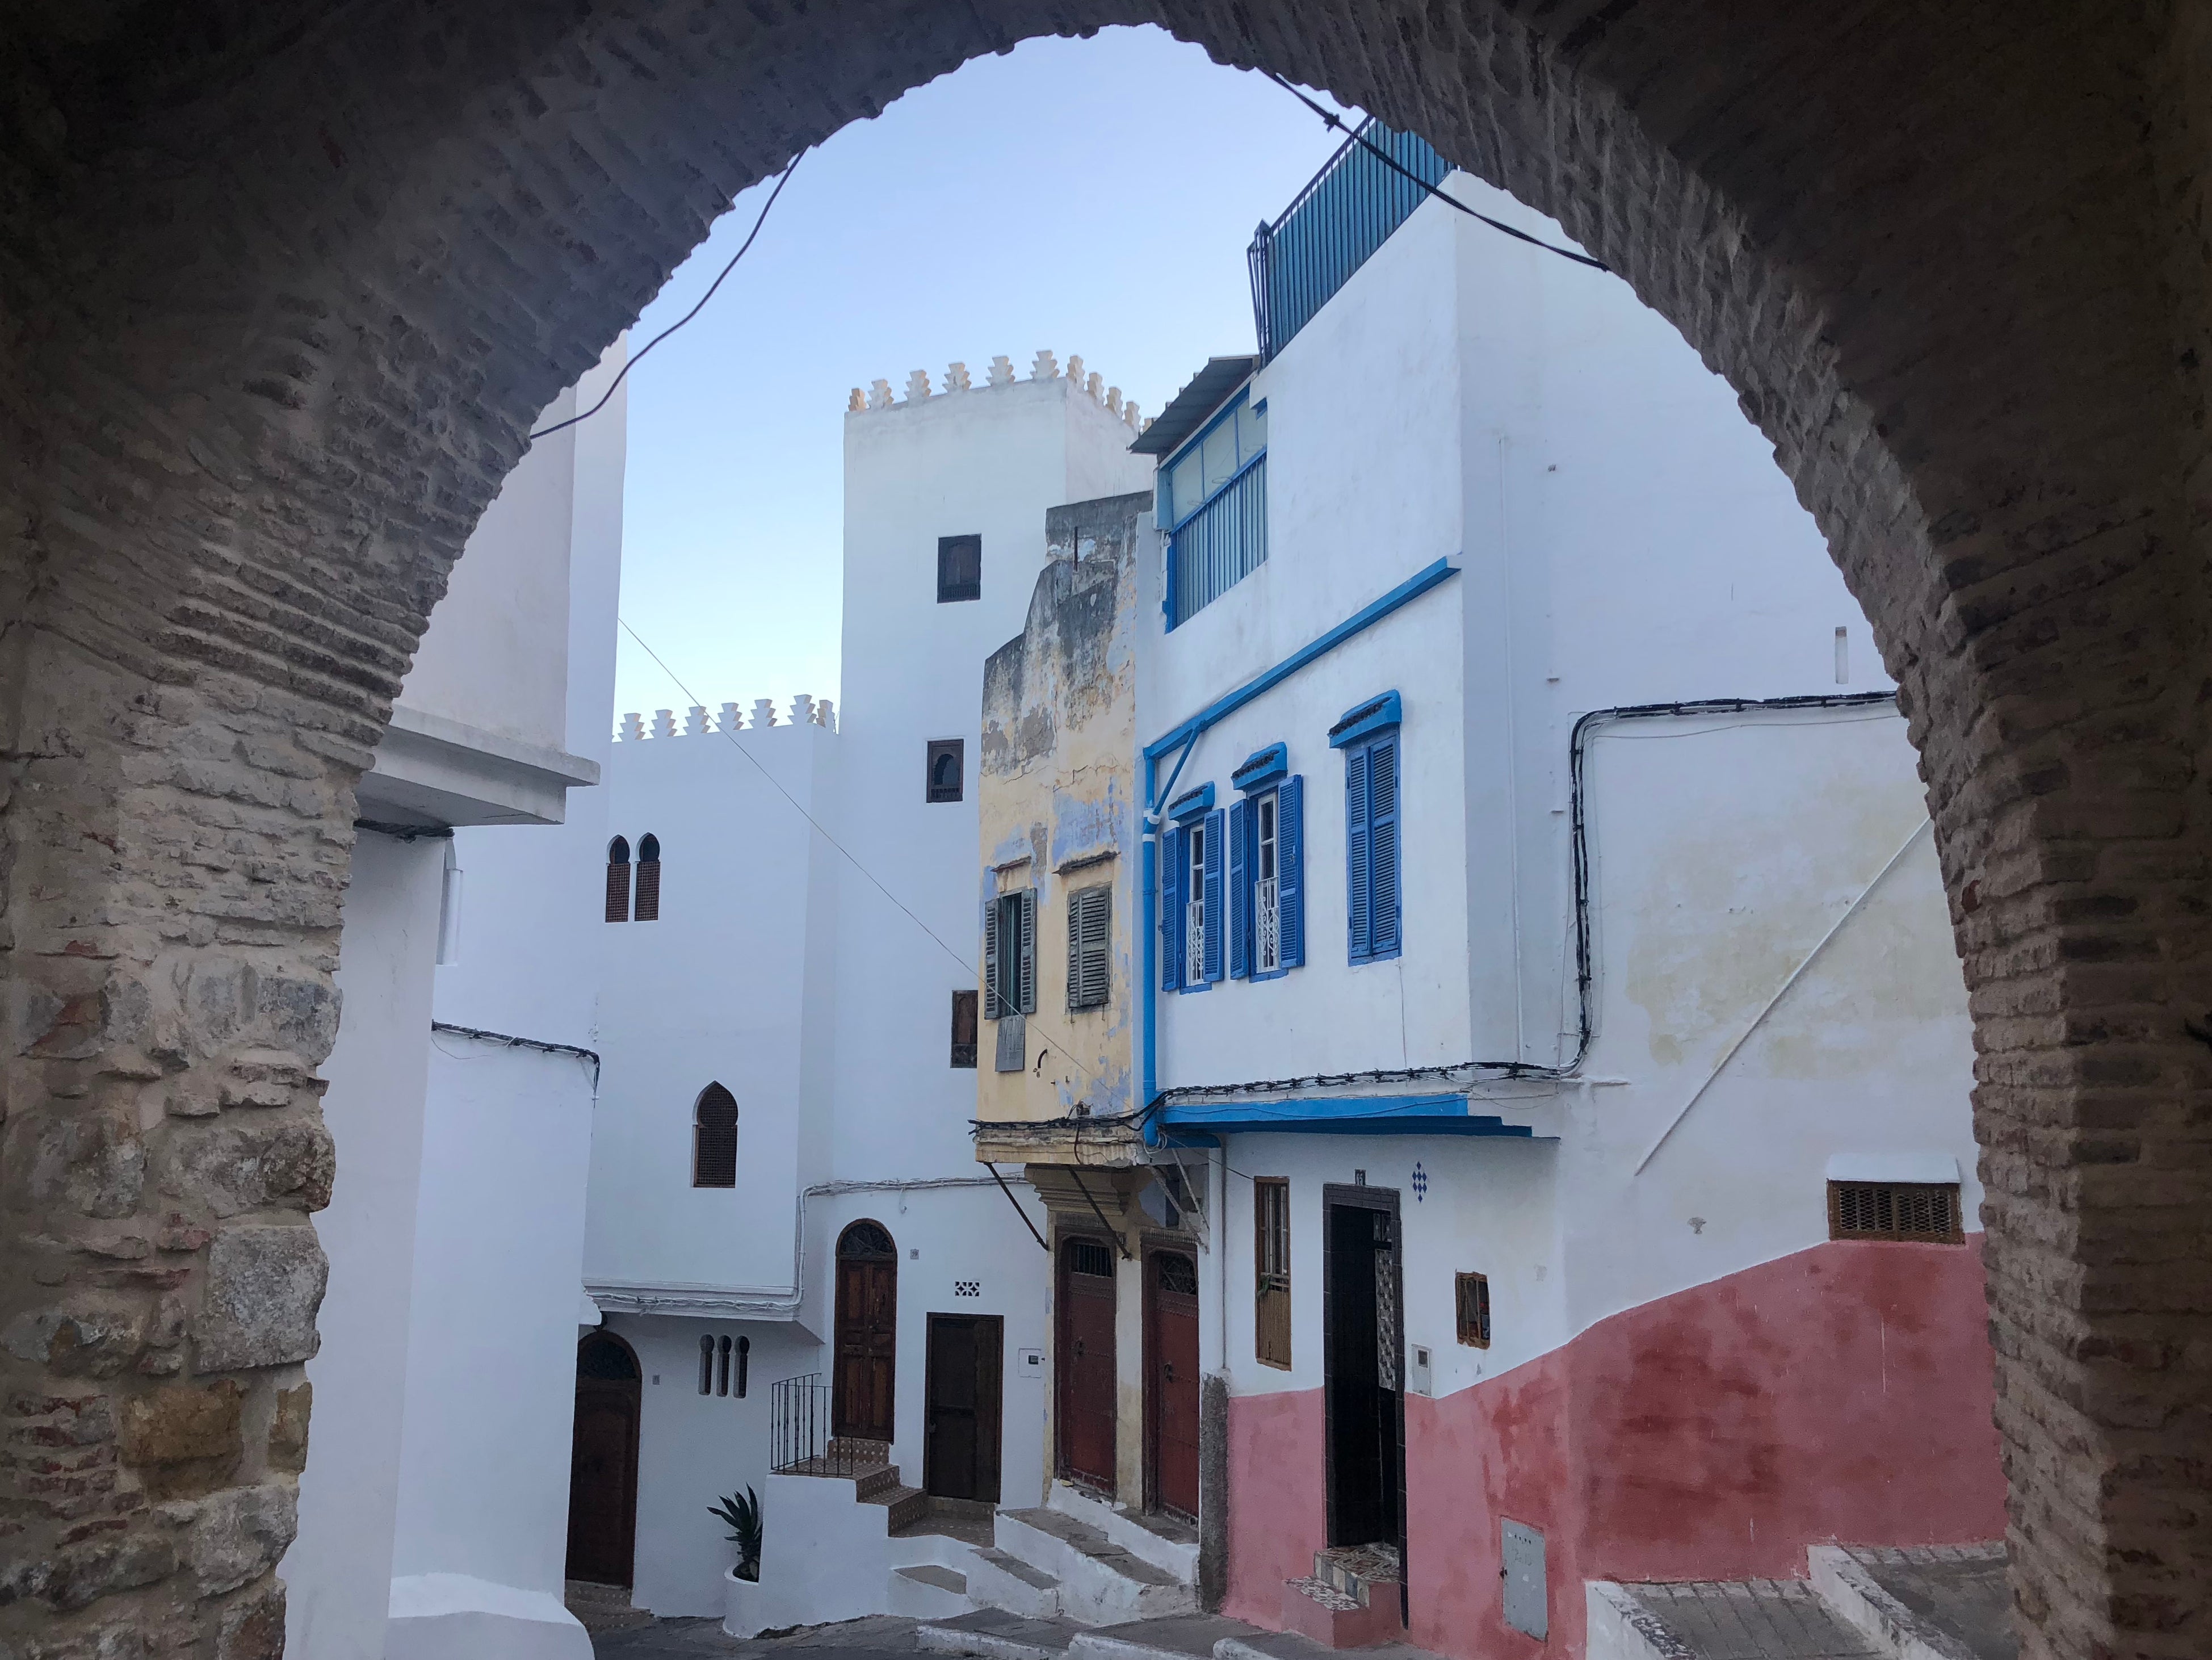 Rock the Kasbah: Tangier is back on the map